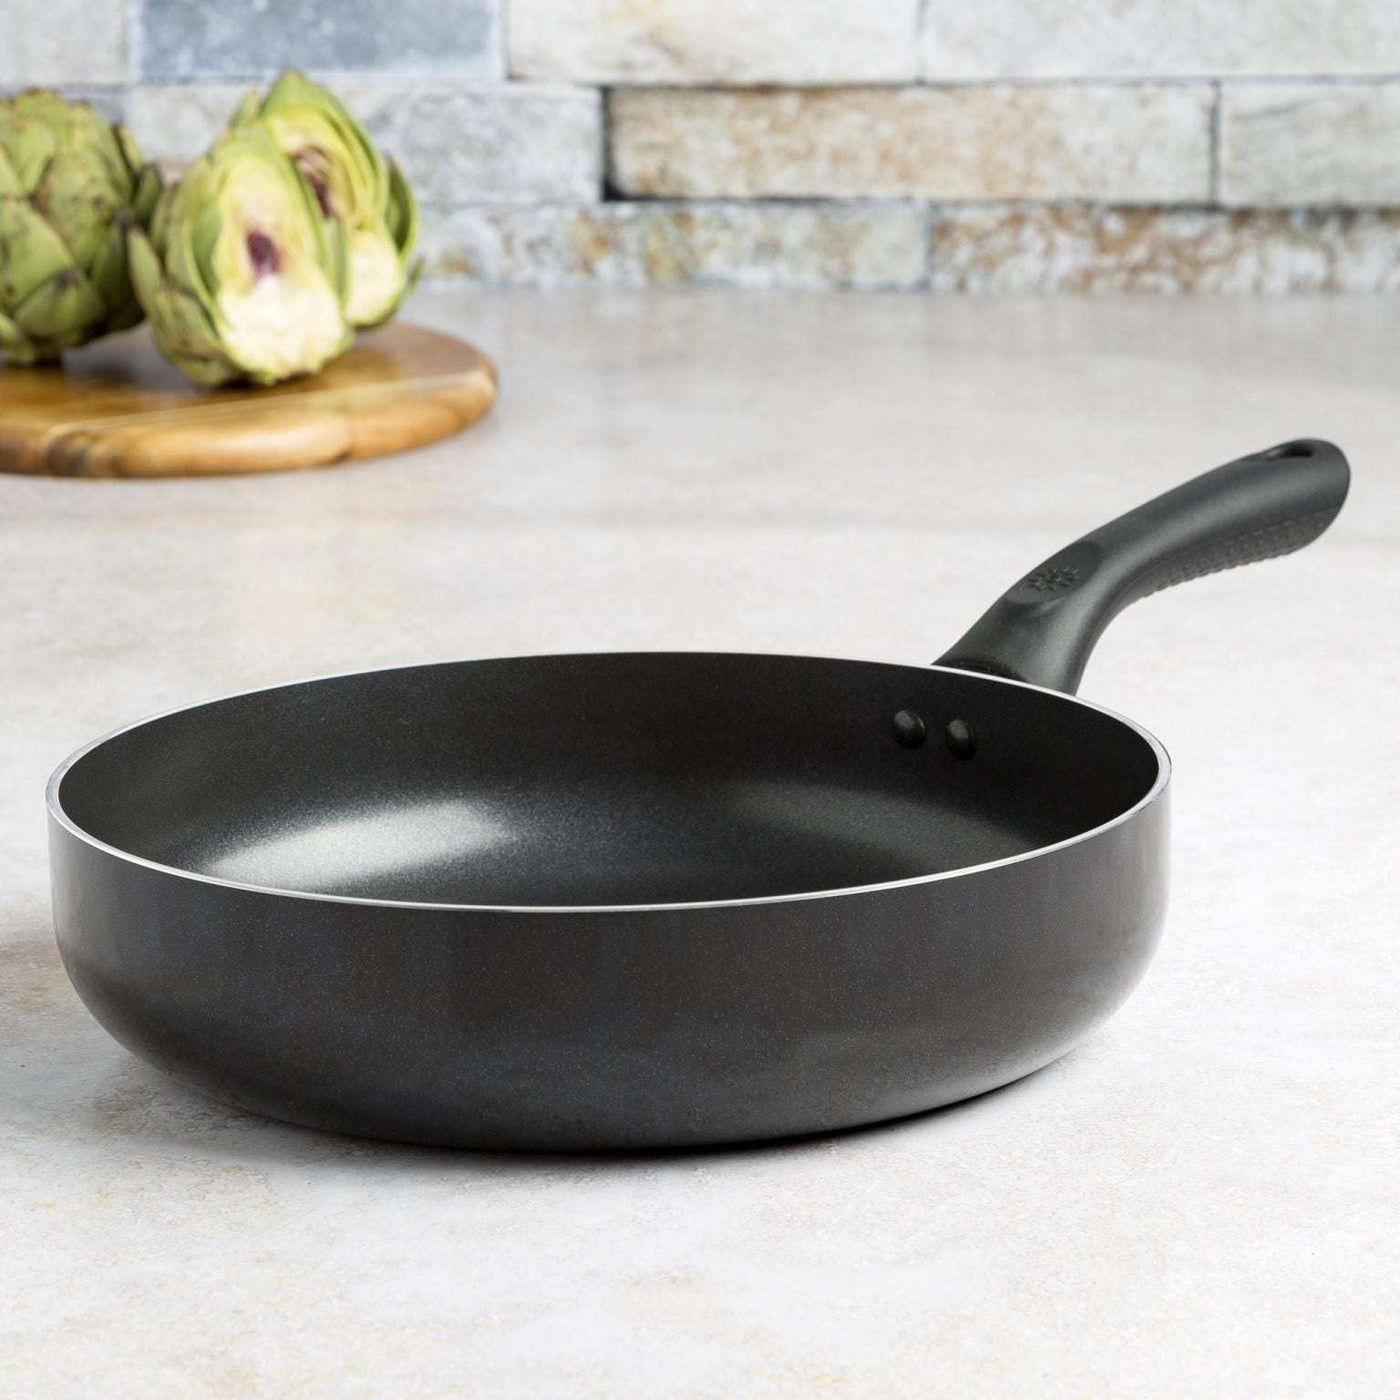 Ecolution Evolve Non-Stick Fry Pan PFOA Free Hydrolon Non-Stick -Pure  Heavy-Gauge Aluminum with a Soft Silicone Handle